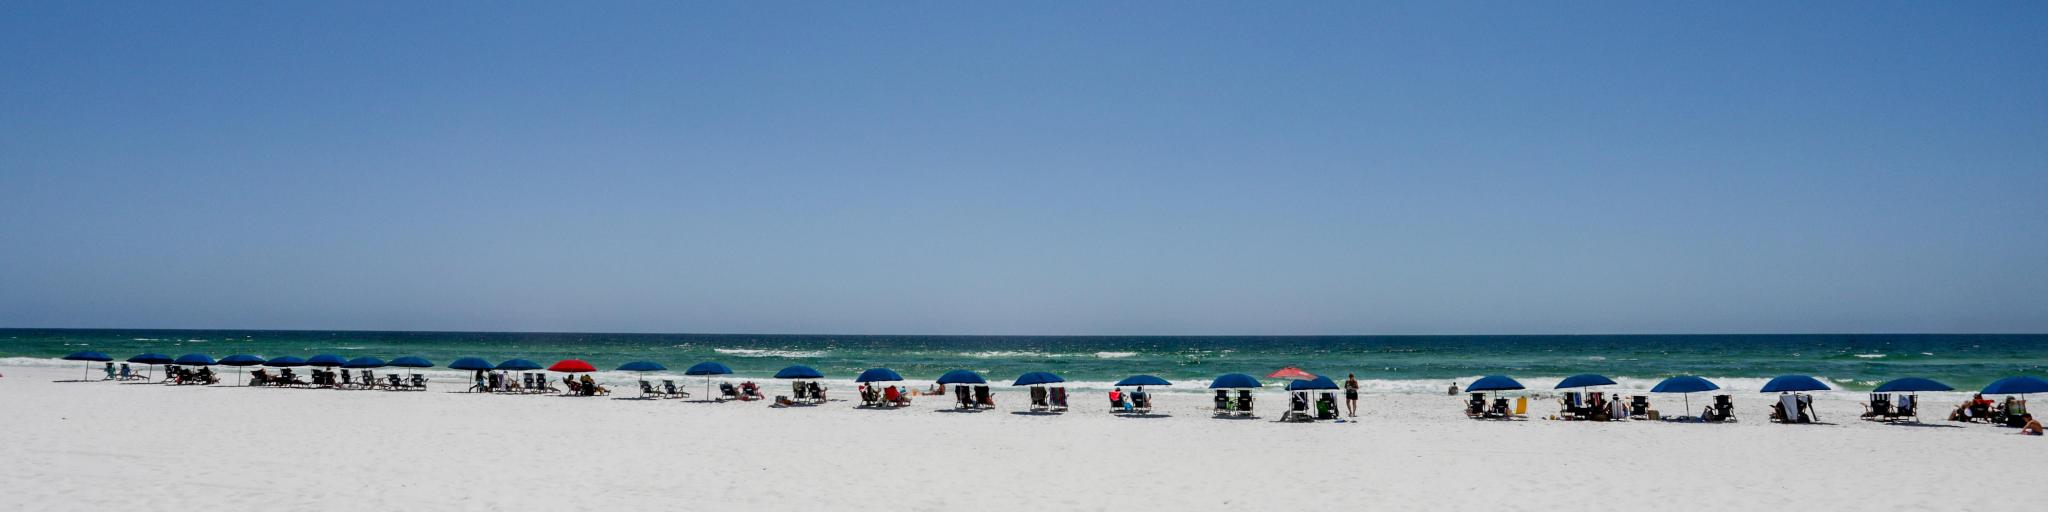 A line of people on sun loungers with umbrellas along a white sandy beach in Destin, Florida